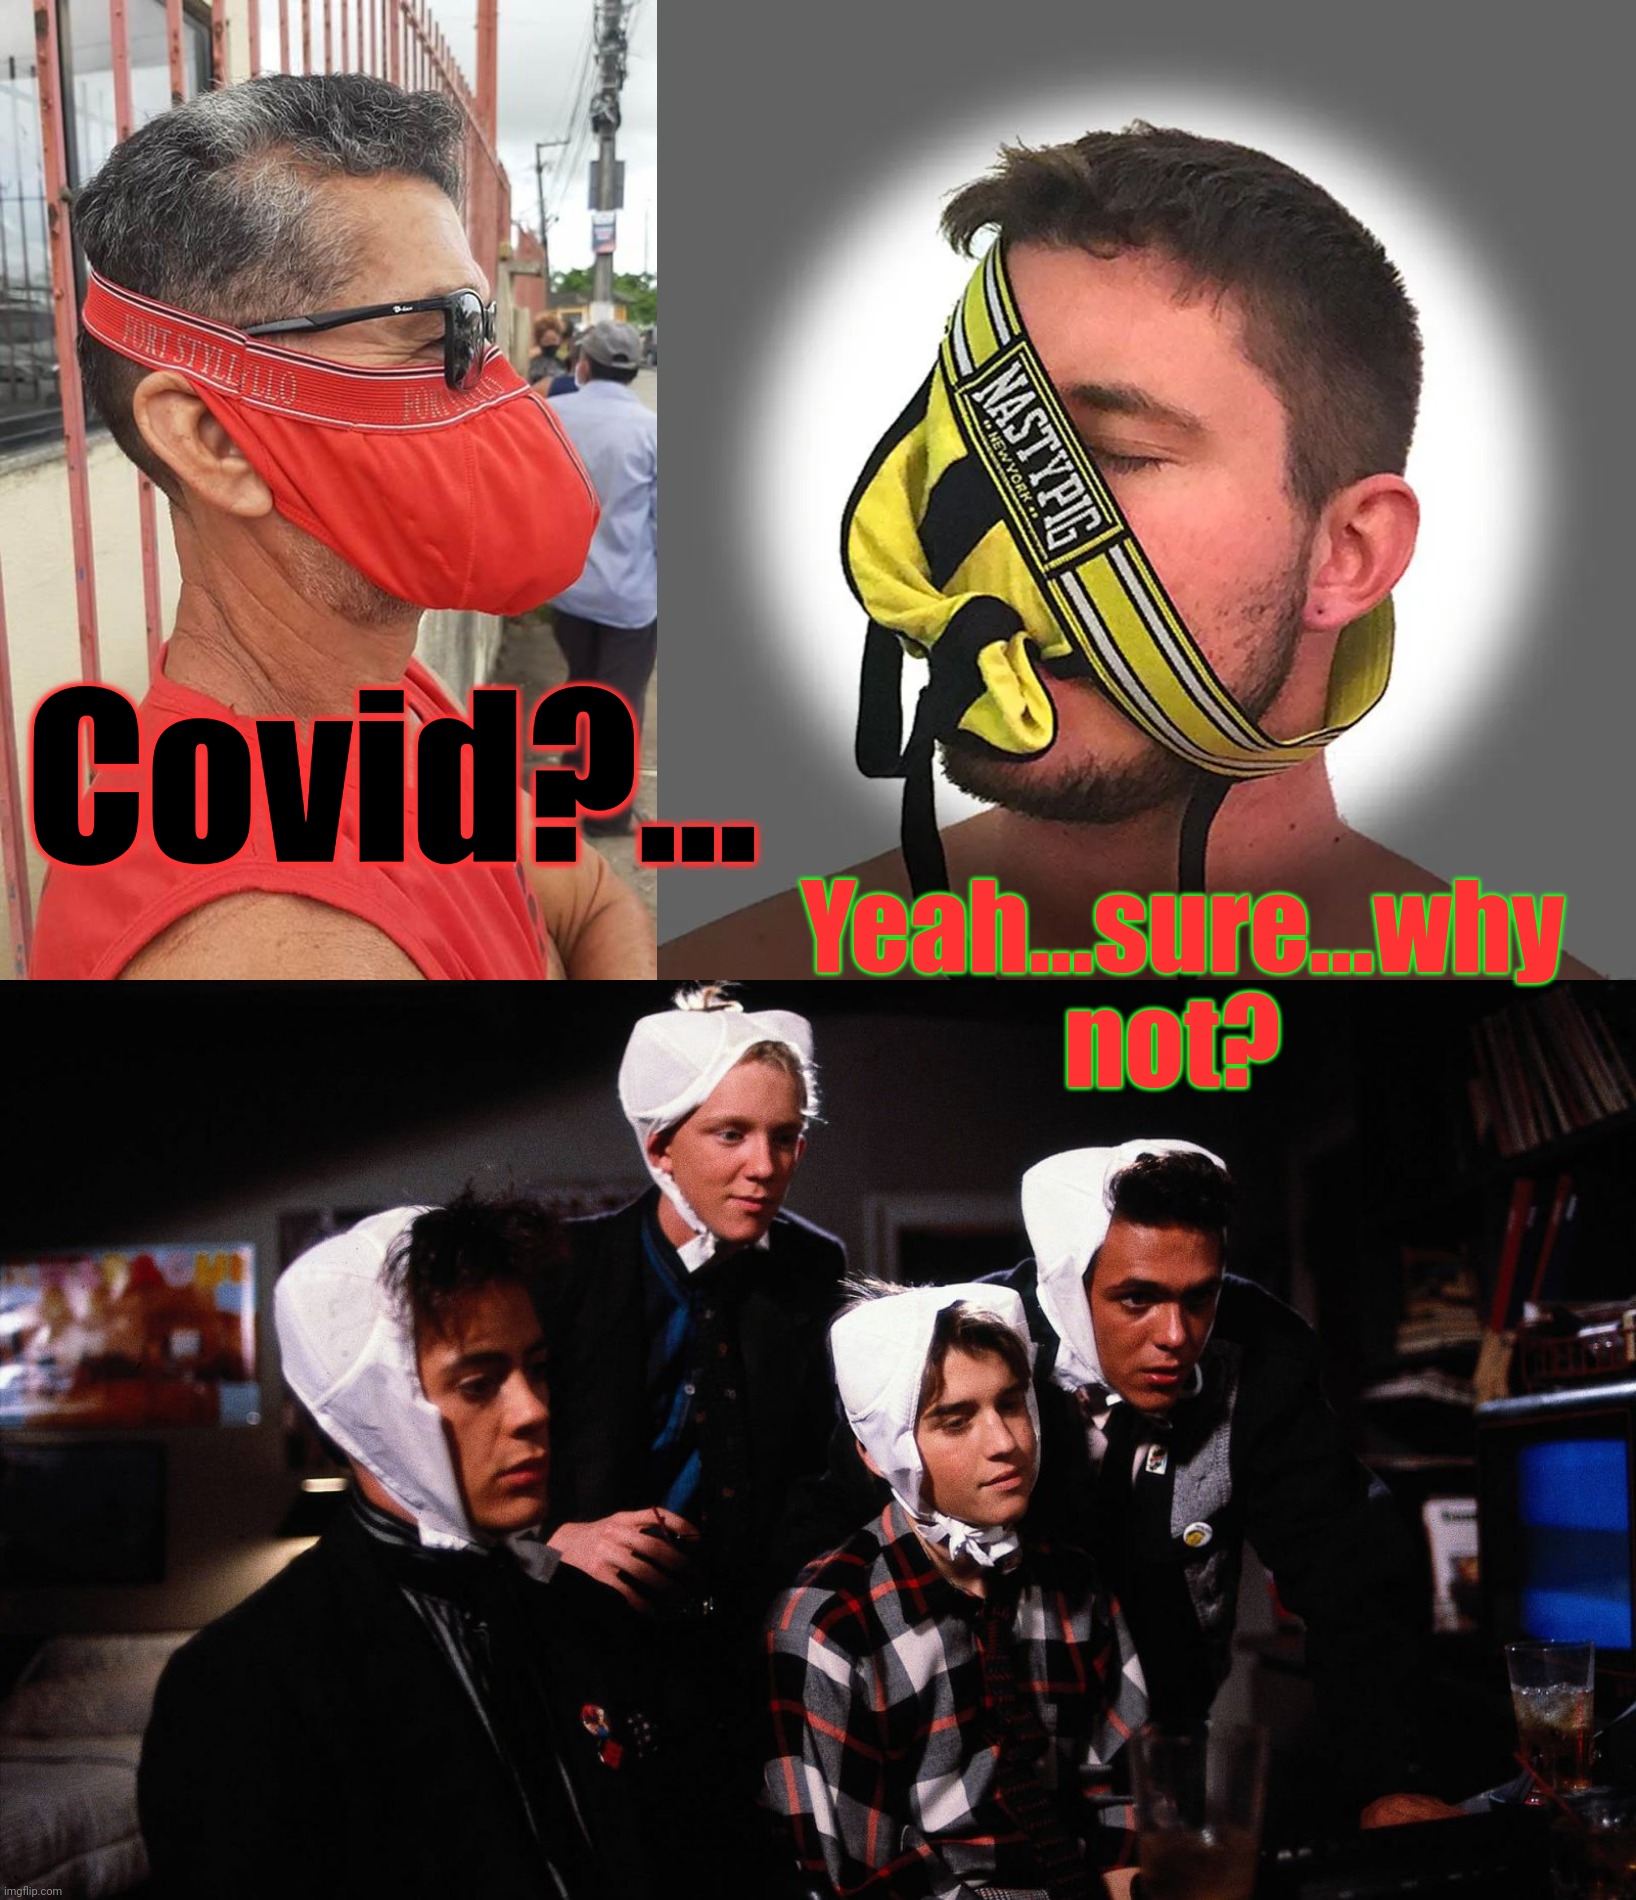 Covid?... Yeah...sure...why not? | made w/ Imgflip meme maker